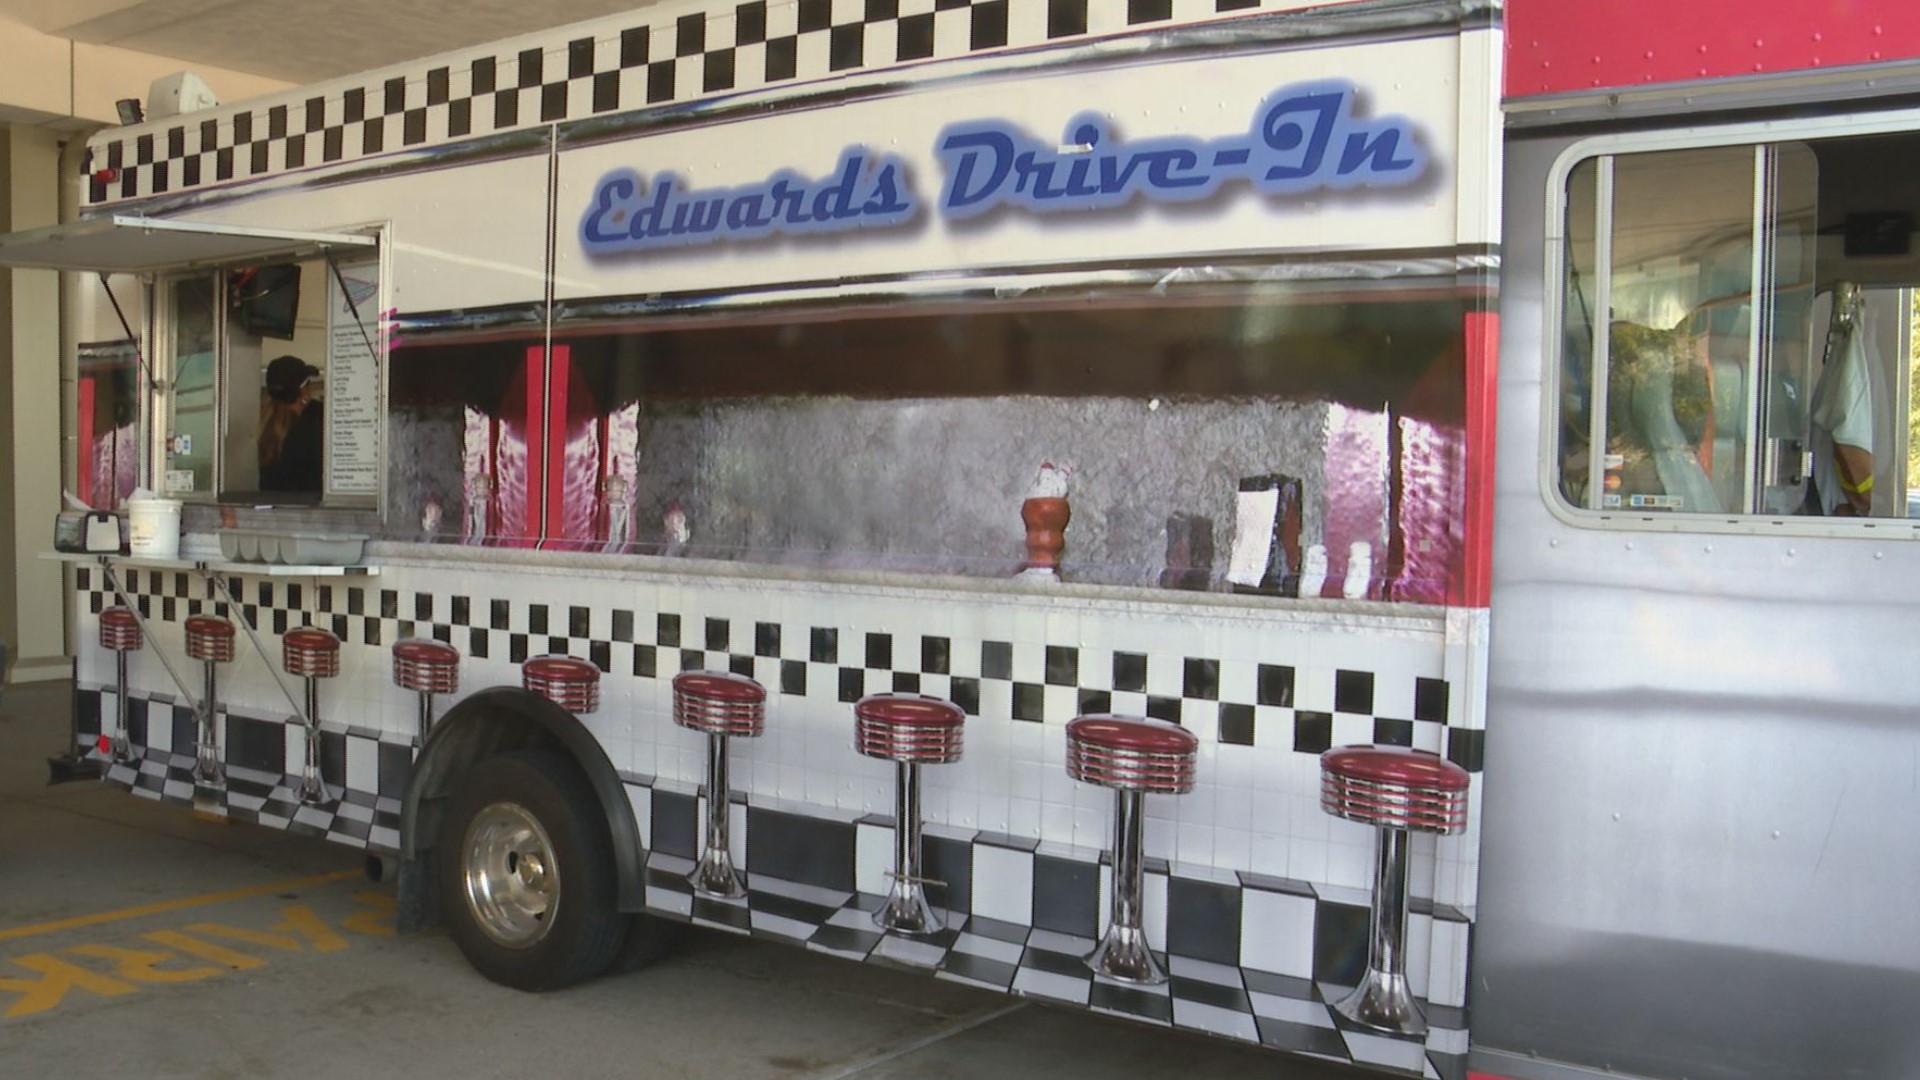 After the pandemic forced their restaurant to close in January, Edwards took the menu on the road in a food truck.